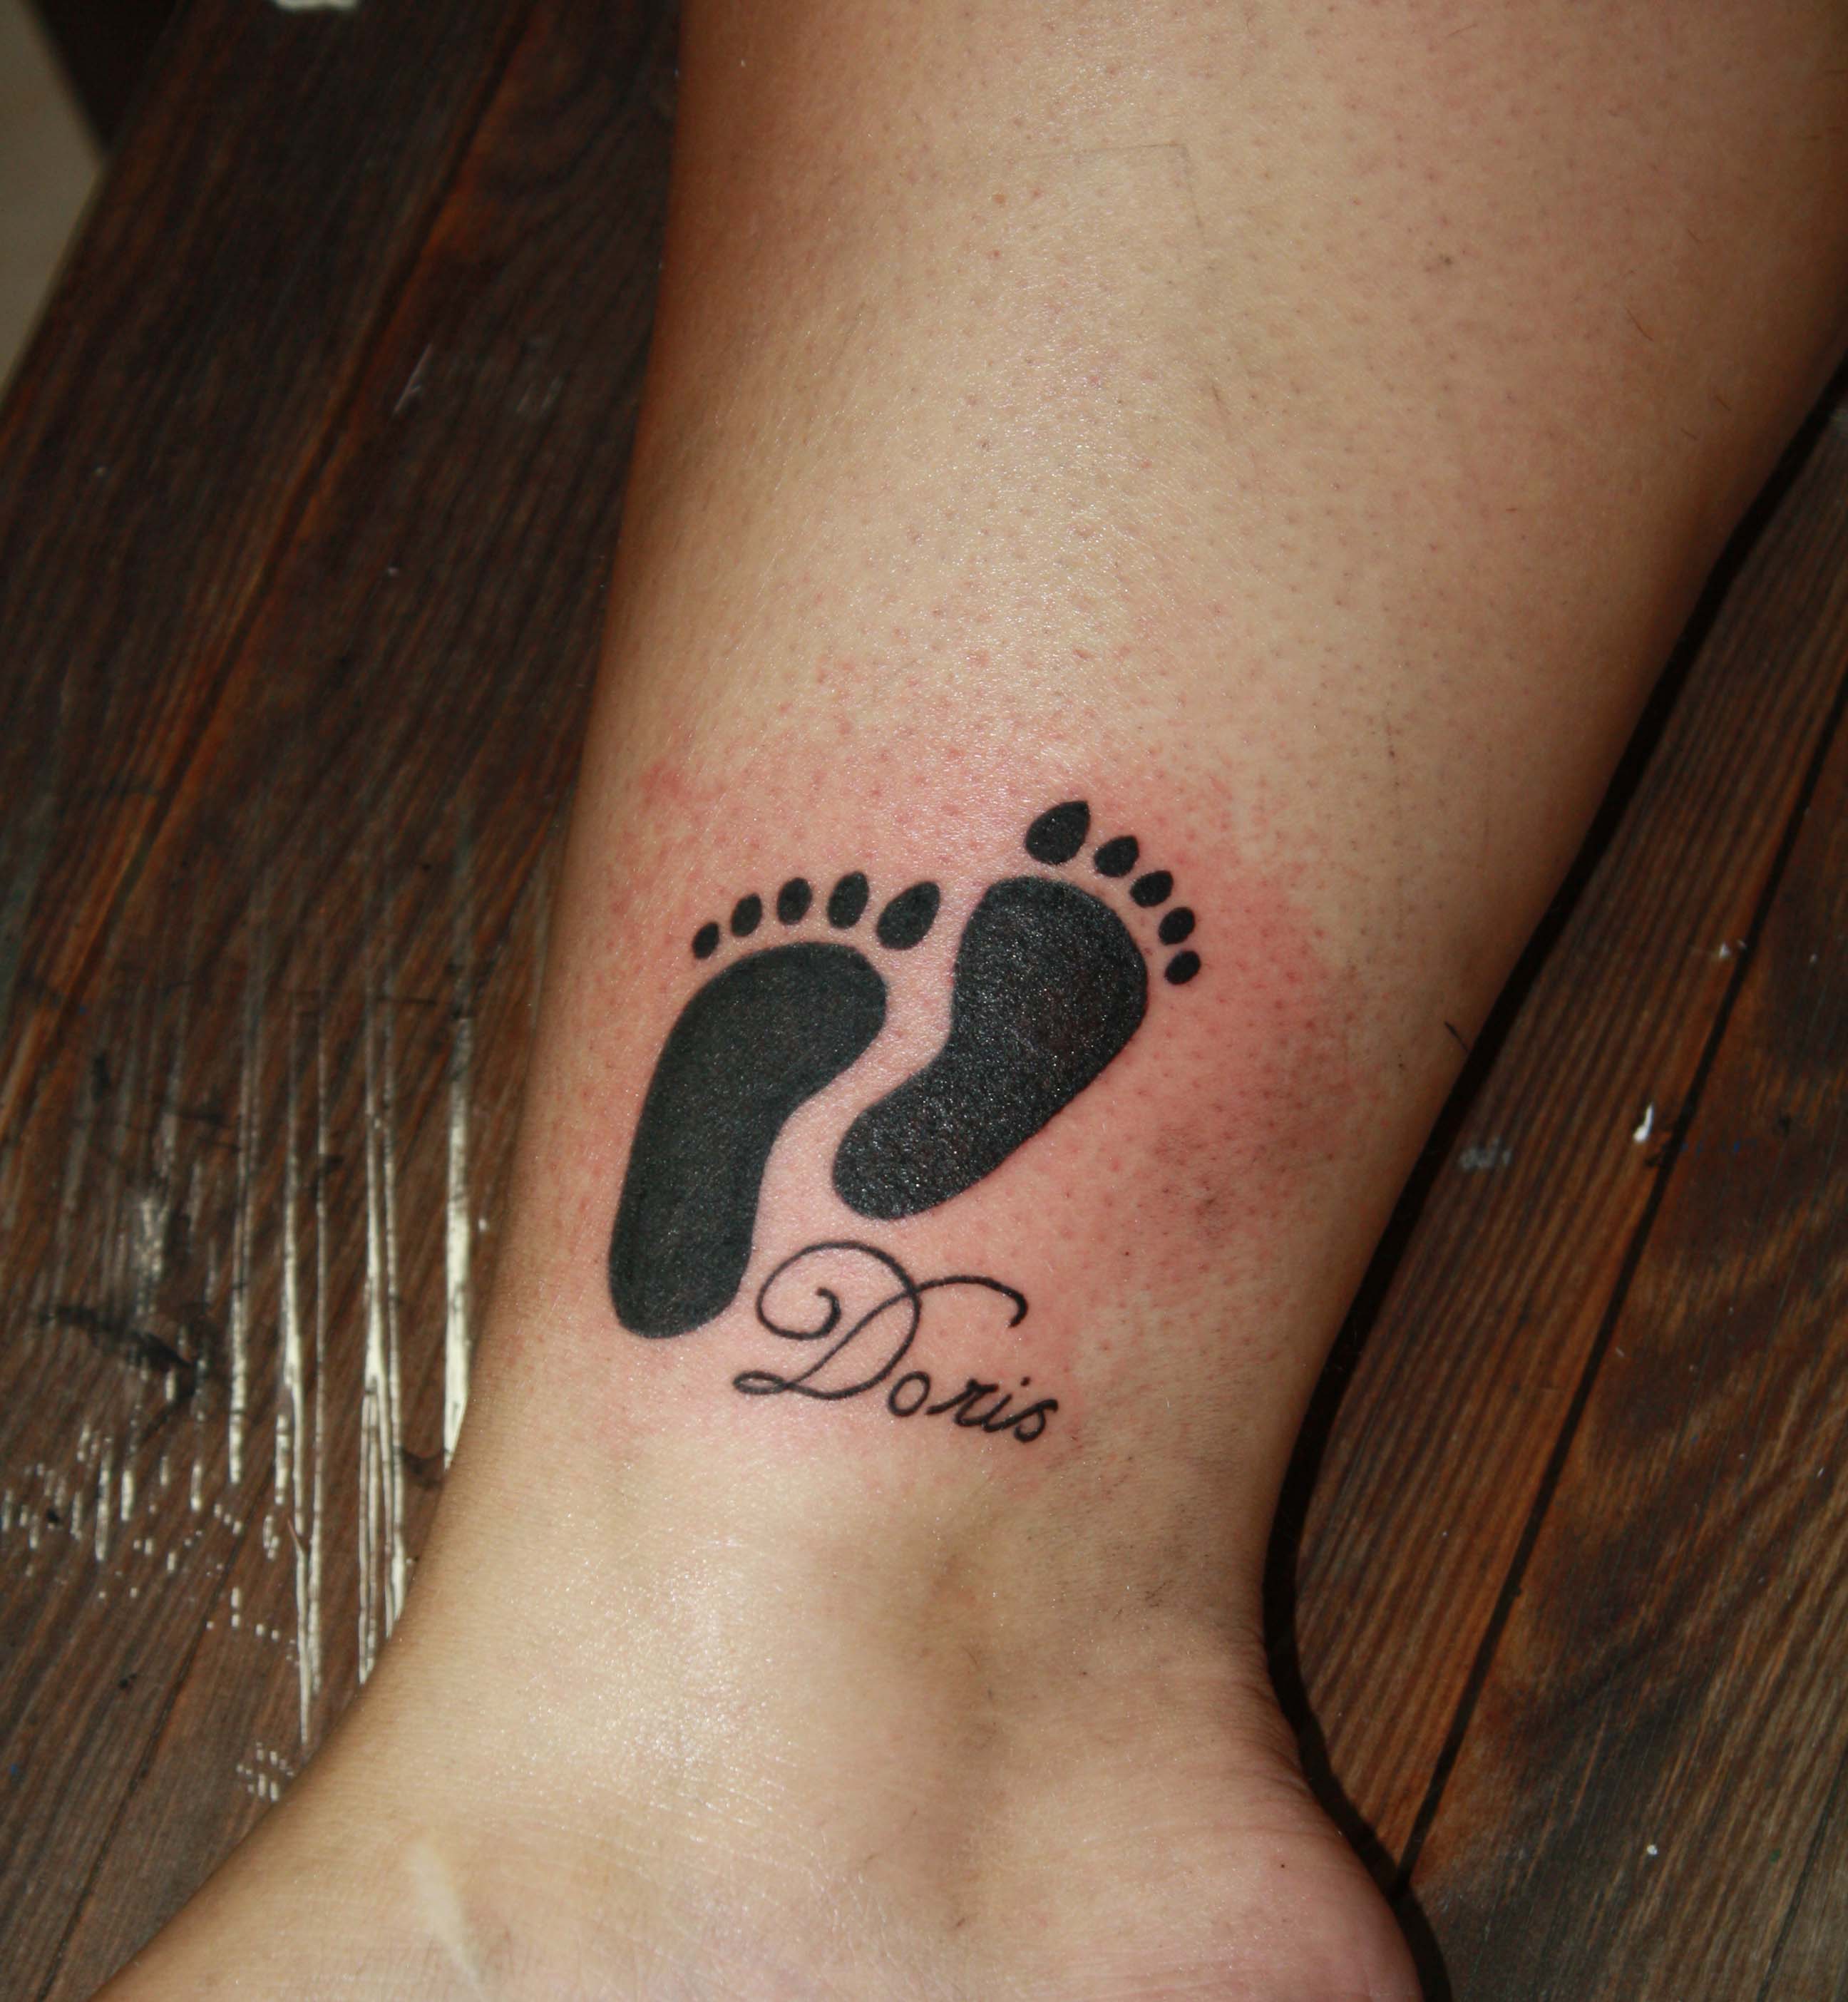  ankle tattoos with name